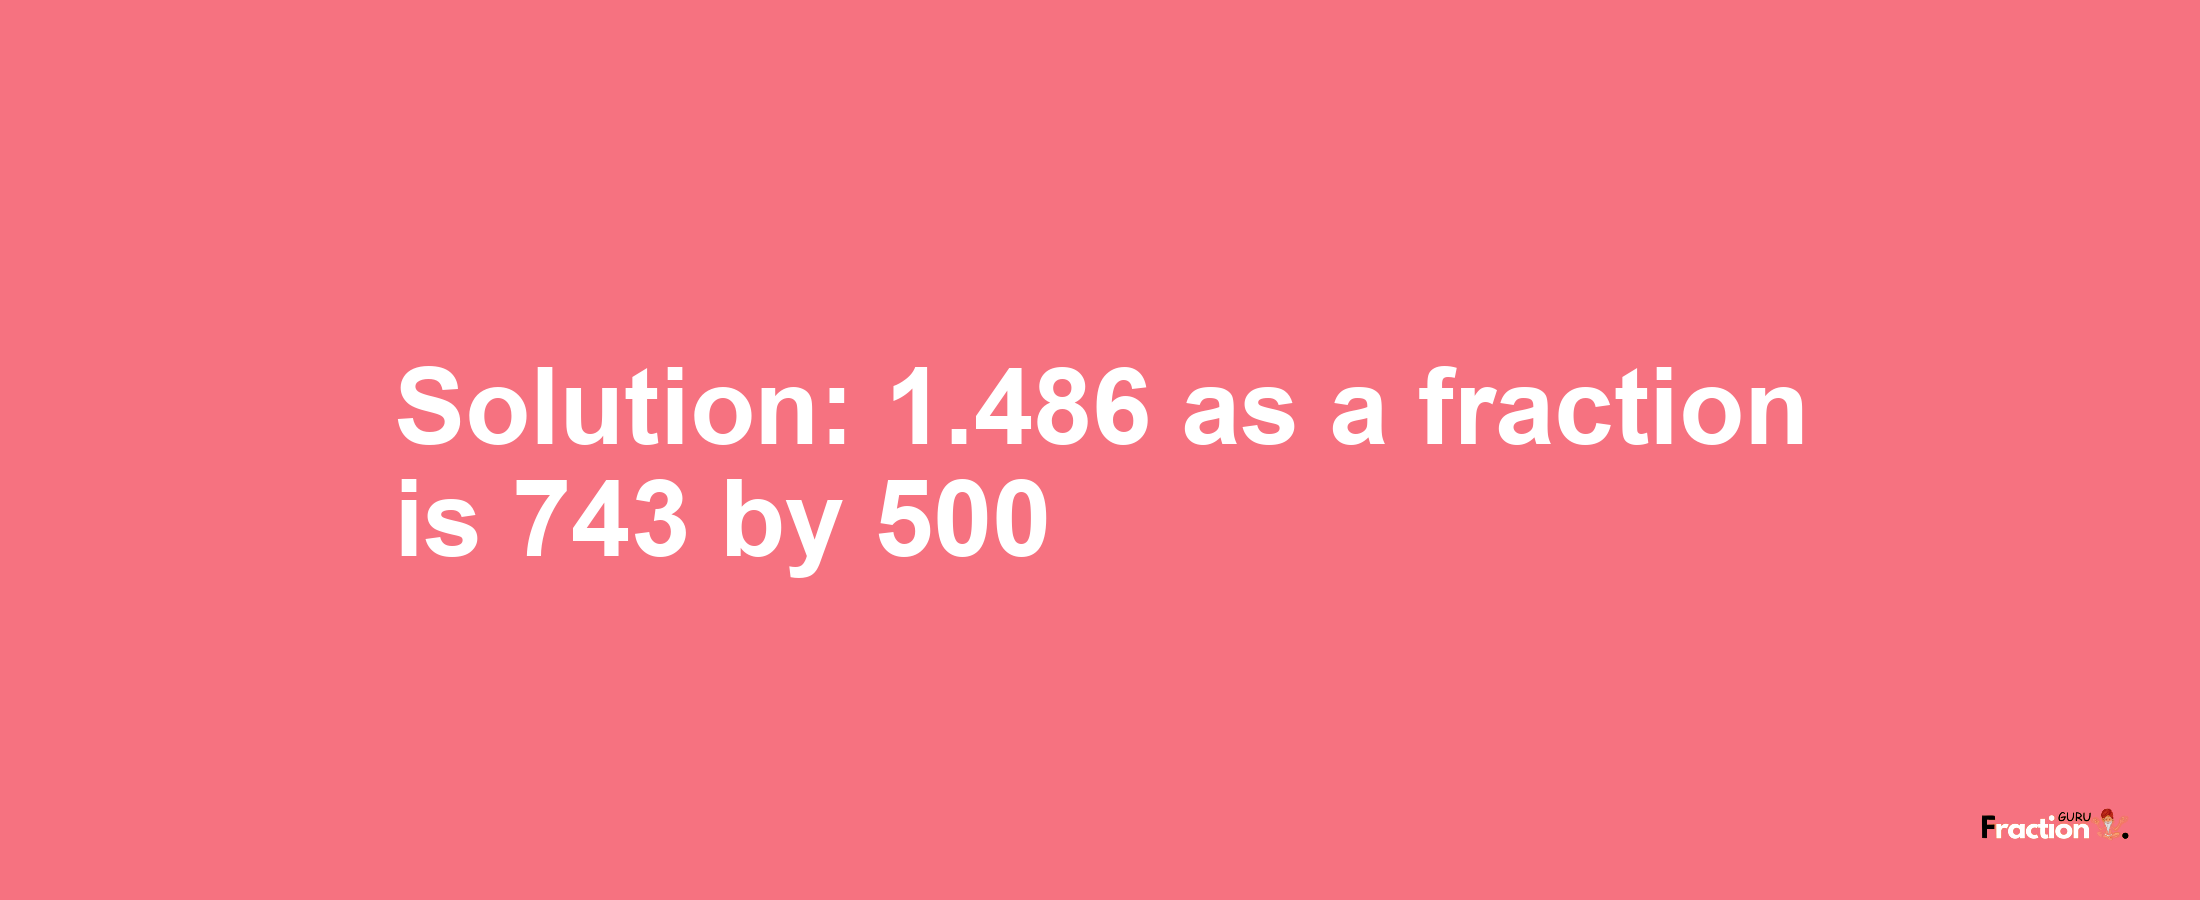 Solution:1.486 as a fraction is 743/500